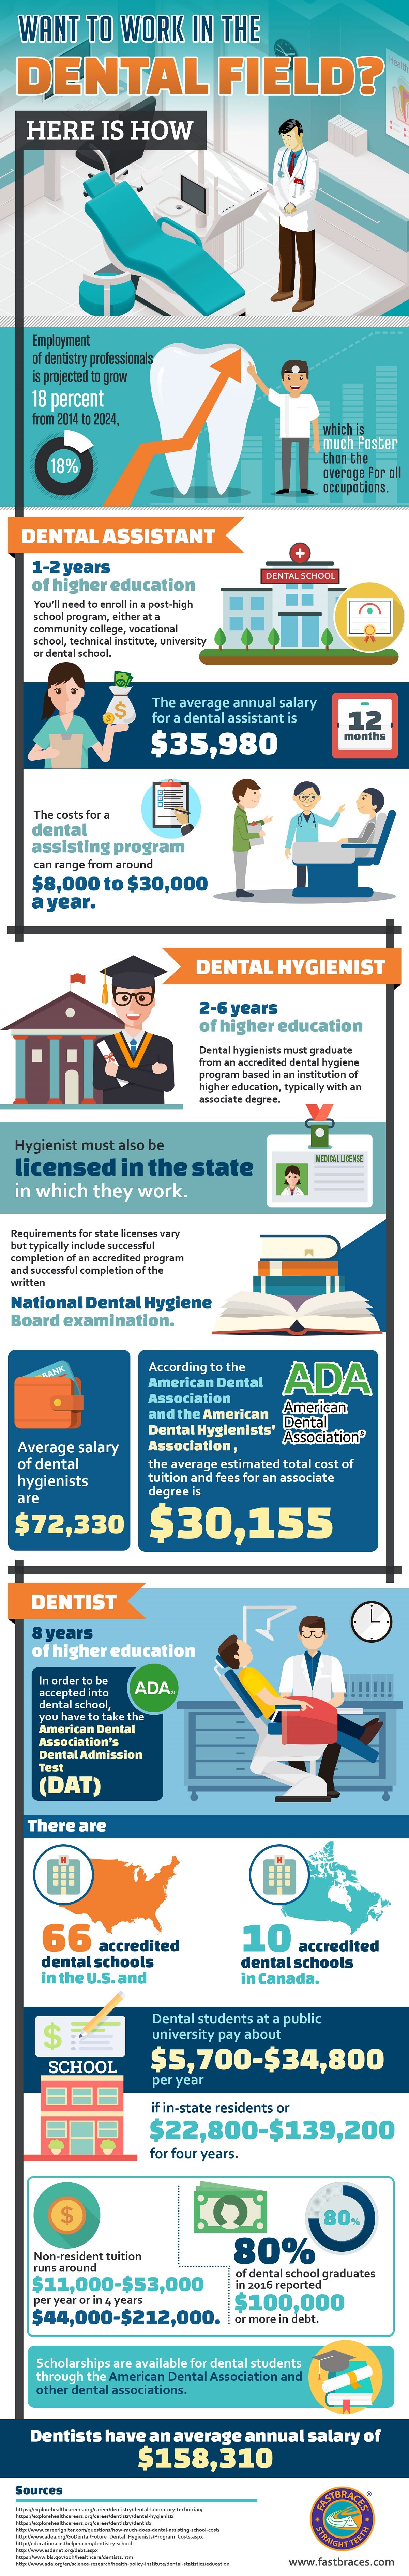 Want to Work in the Dental Field? Here is How